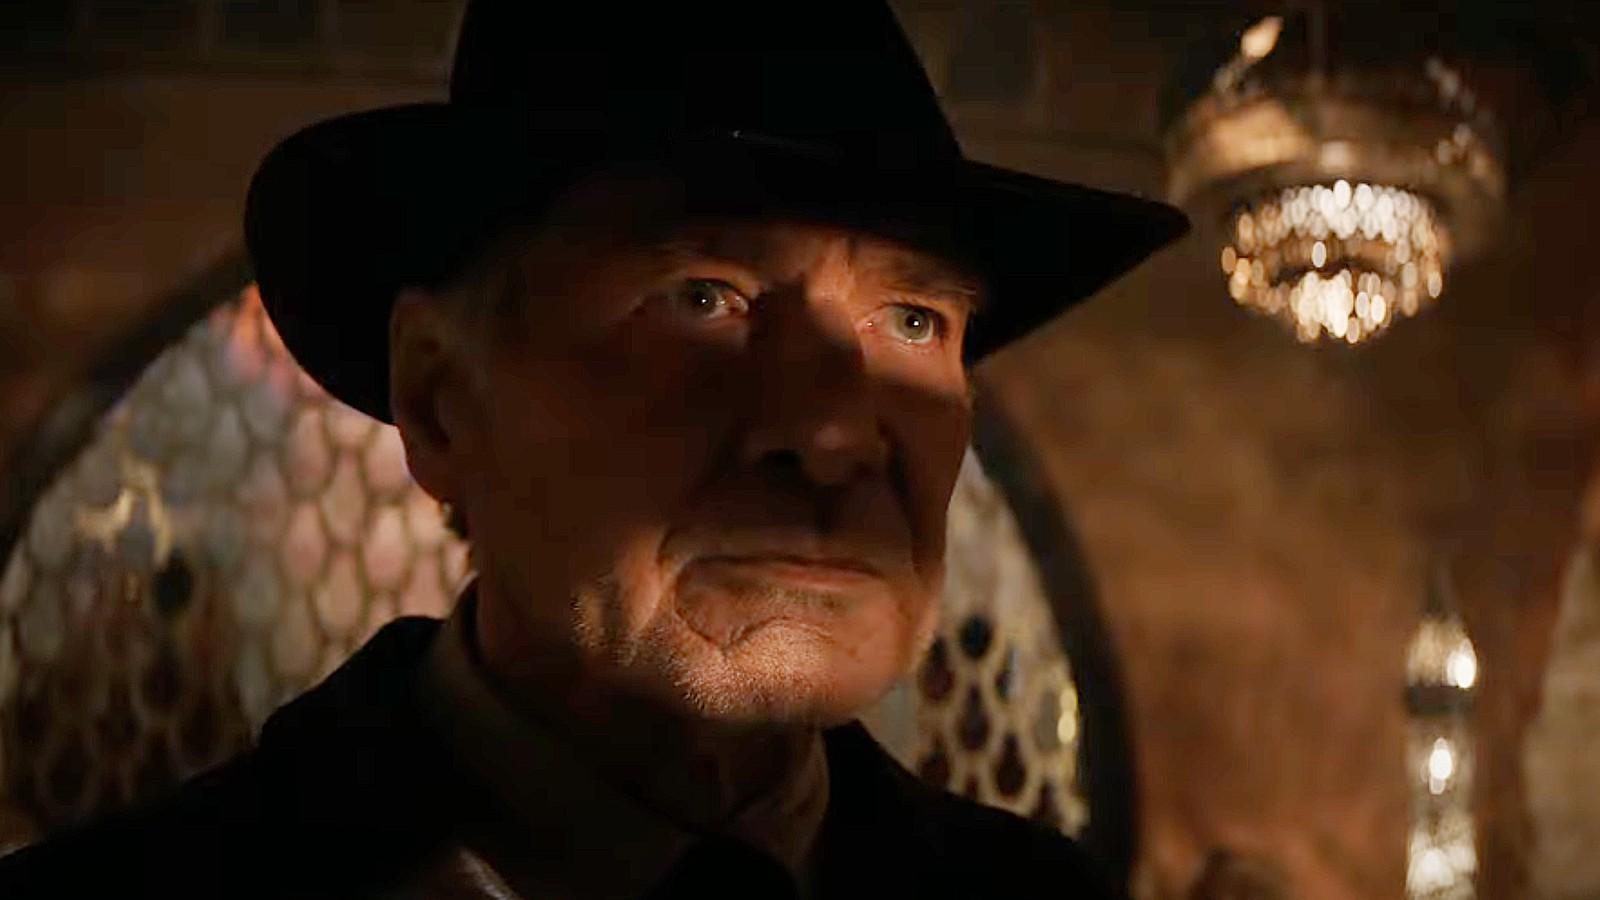 Indiana Jones 5 Will Only Open to $60 MILLION?!